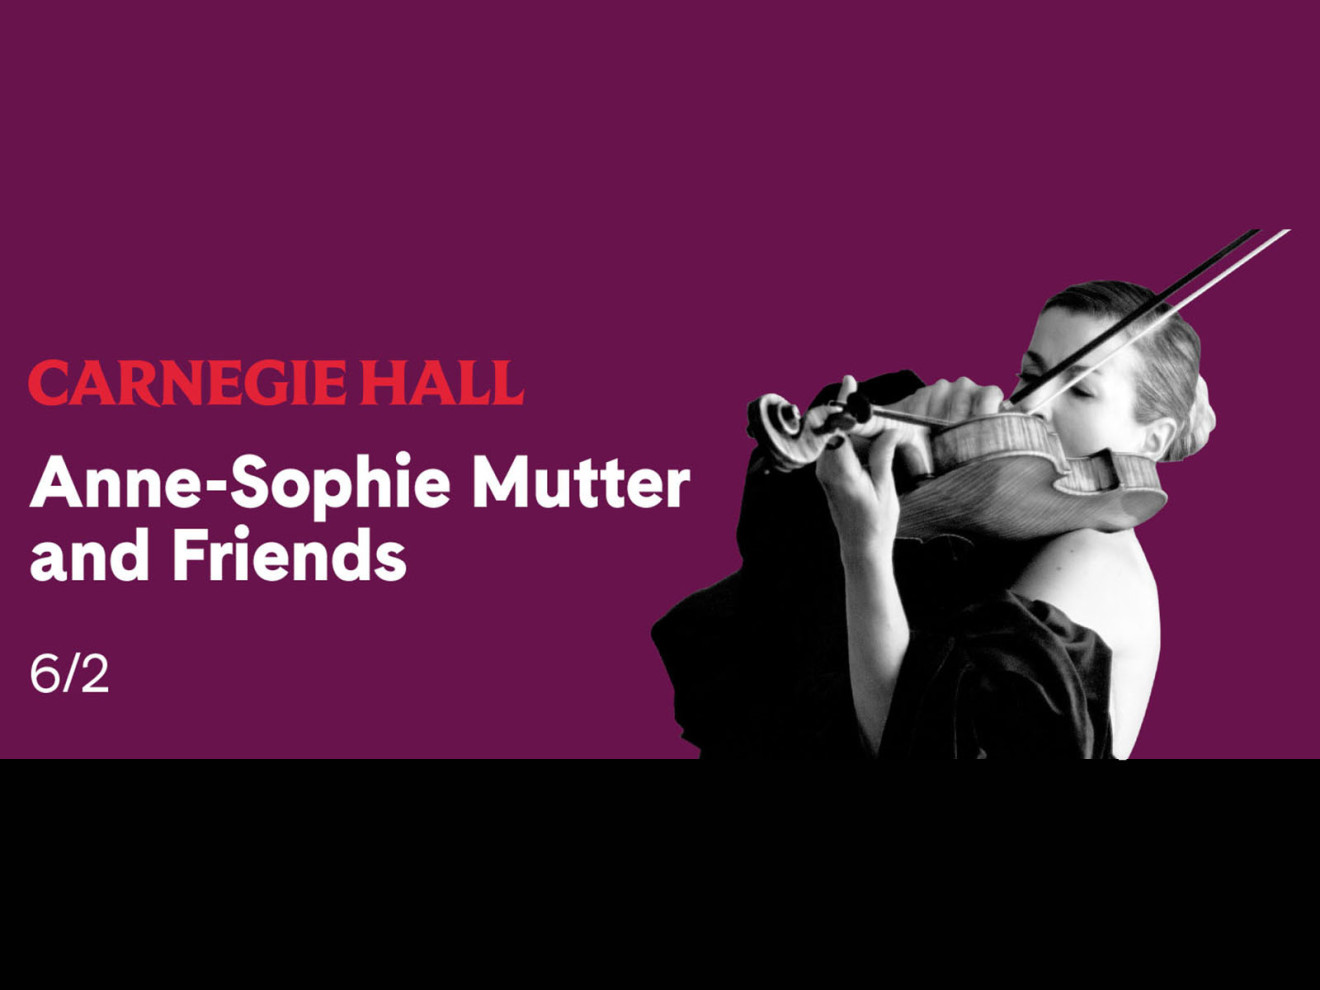 Anne-Sophie Mutter and Friends